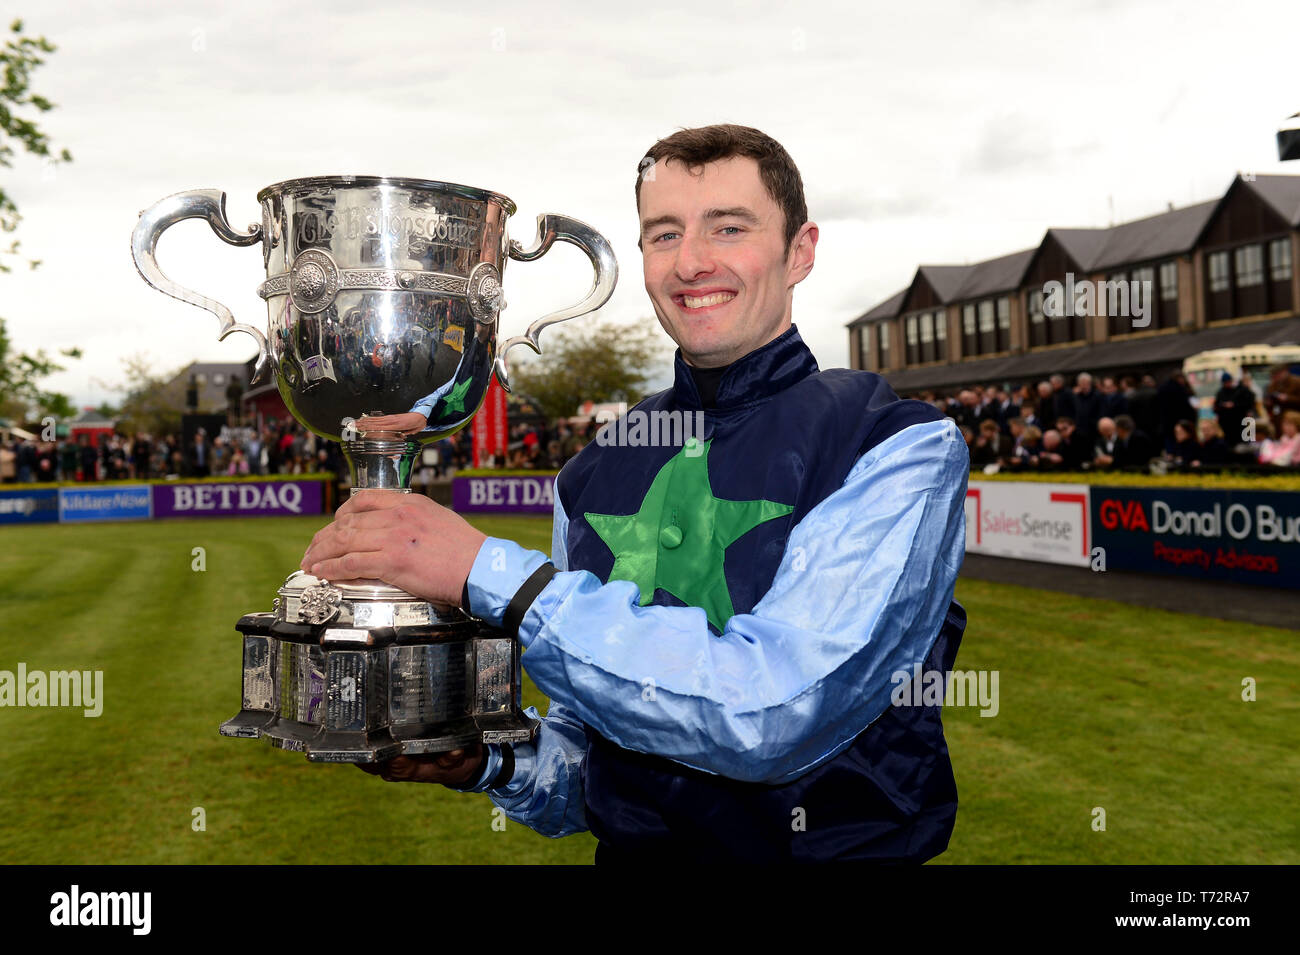 Niall Redmond with the cup after winning the KFM Hunters Chase For The Bishopscourt Cup onboard Flirting Lesa during day four of the Punchestown Festival at Punchestown Racecourse, County Kildare, Ireland. Stock Photo